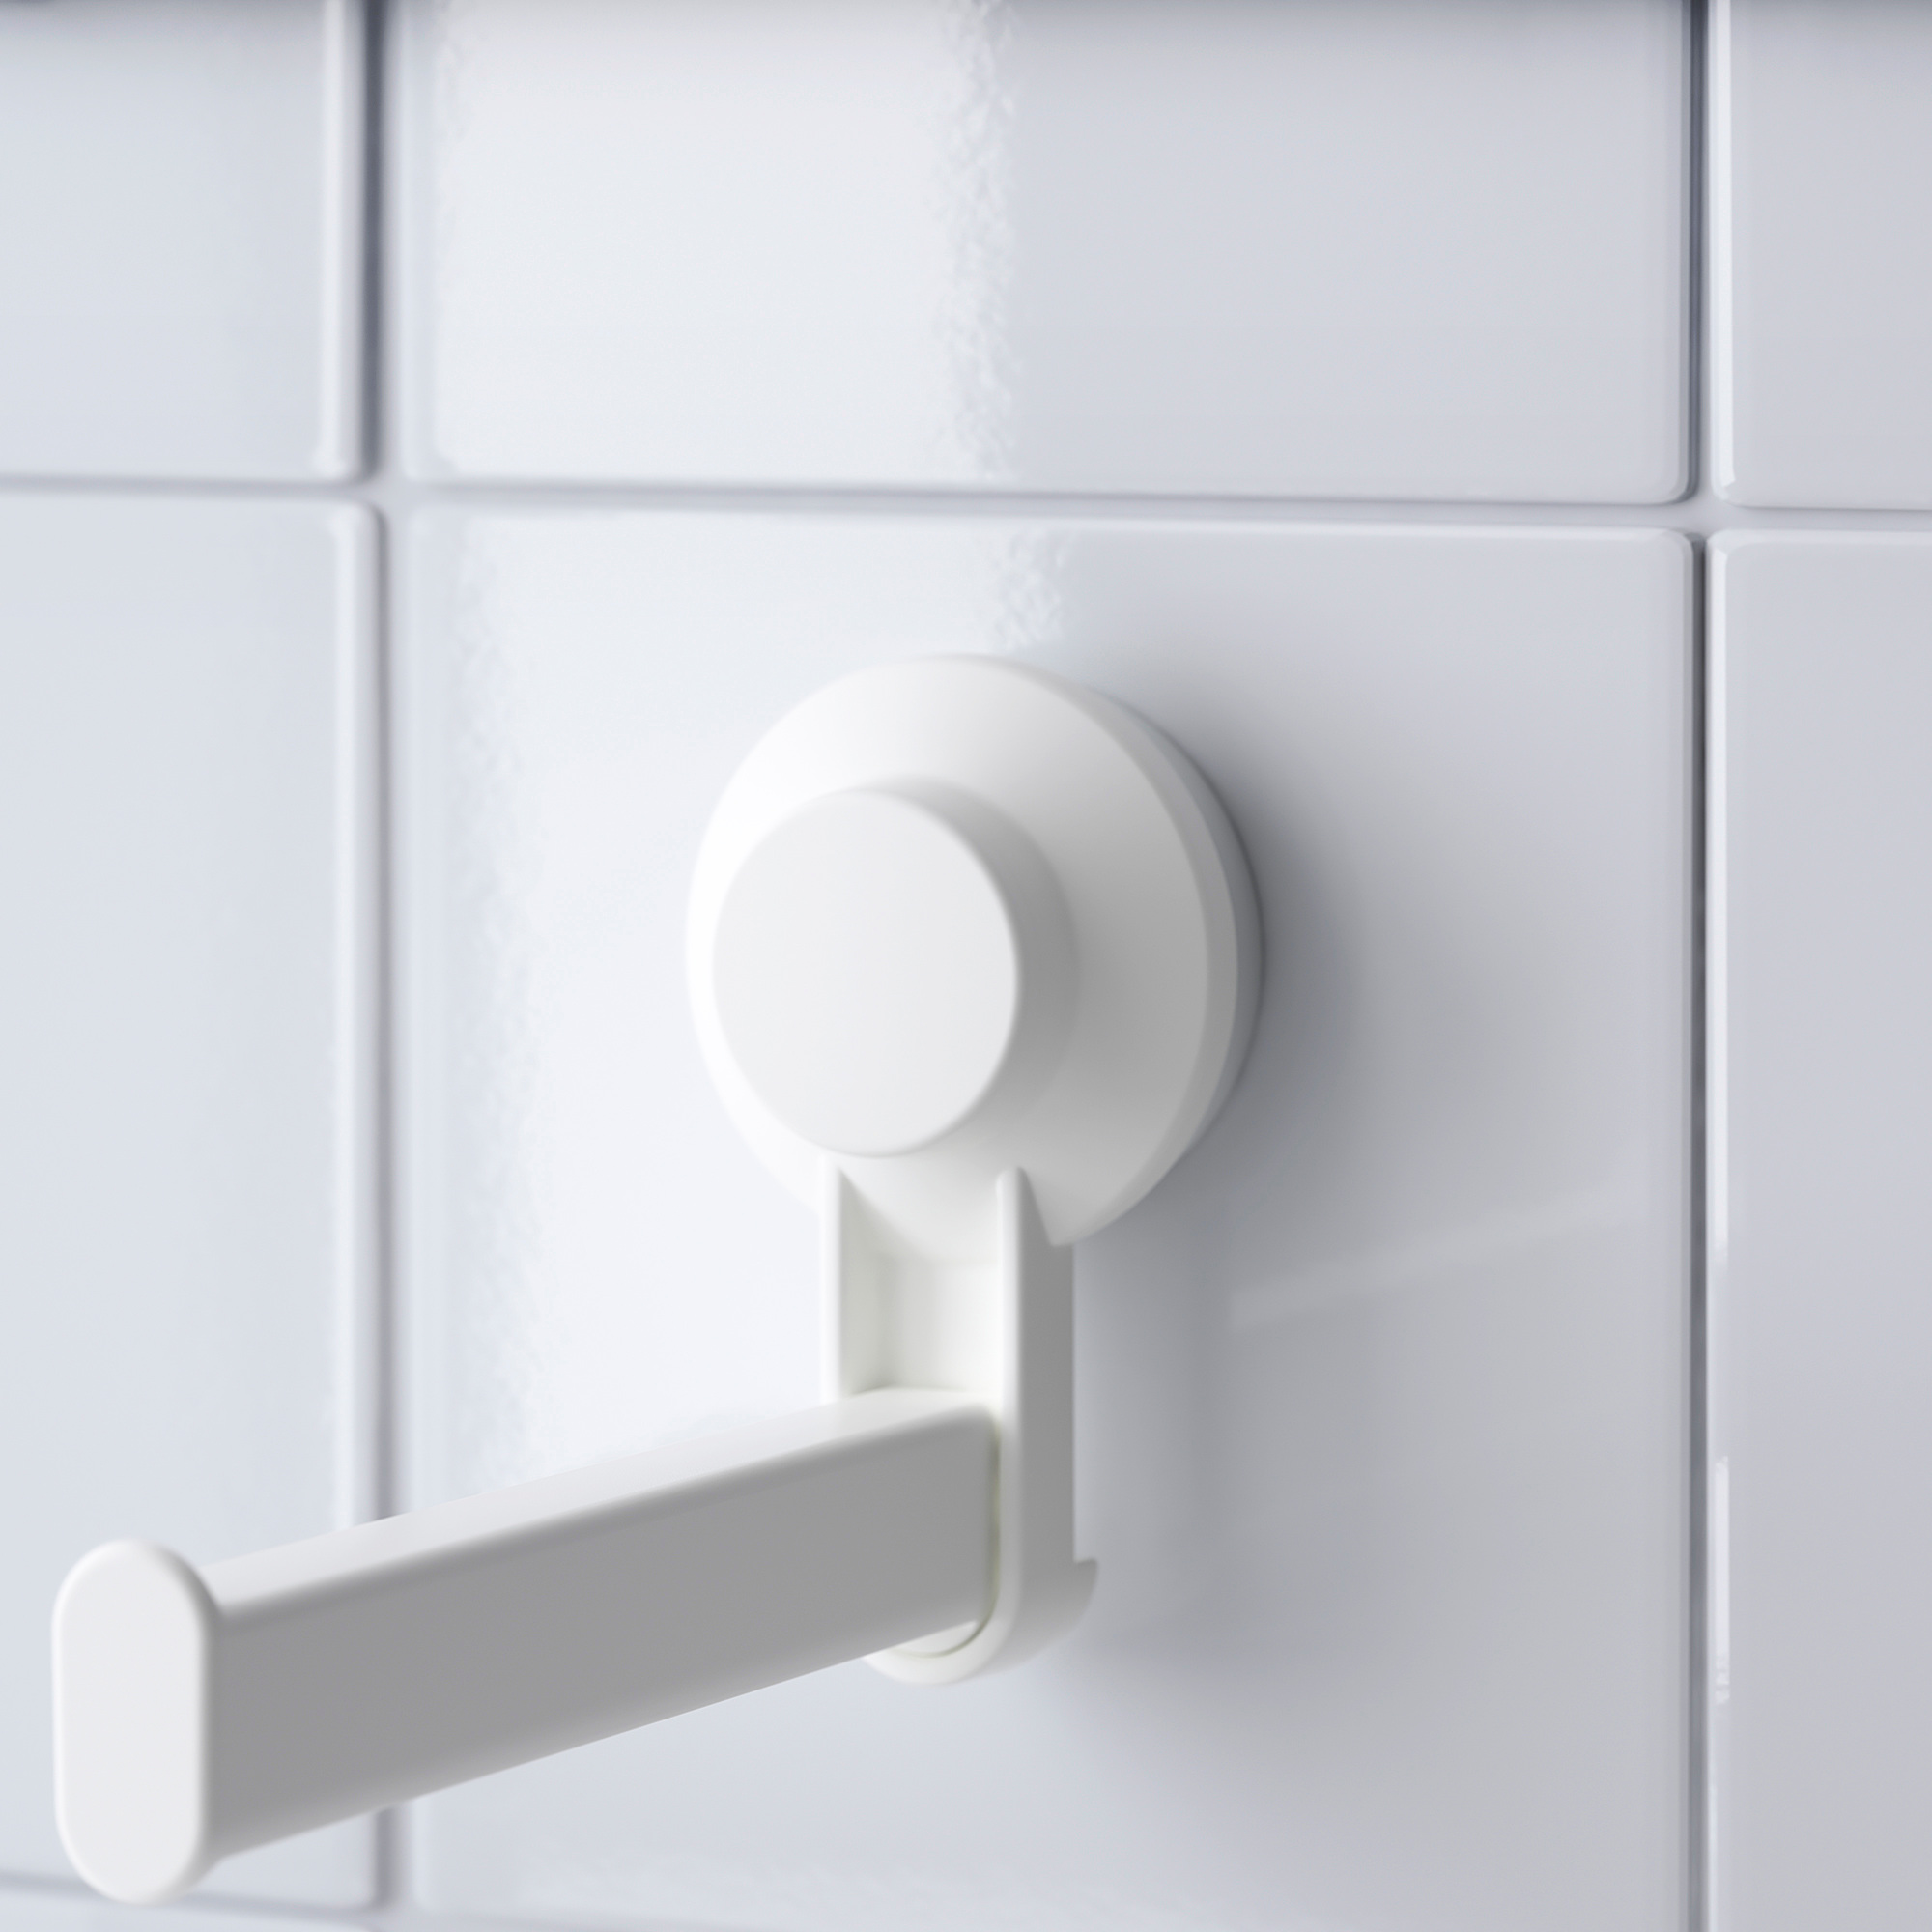 TISKEN toilet roll holder with suction cup